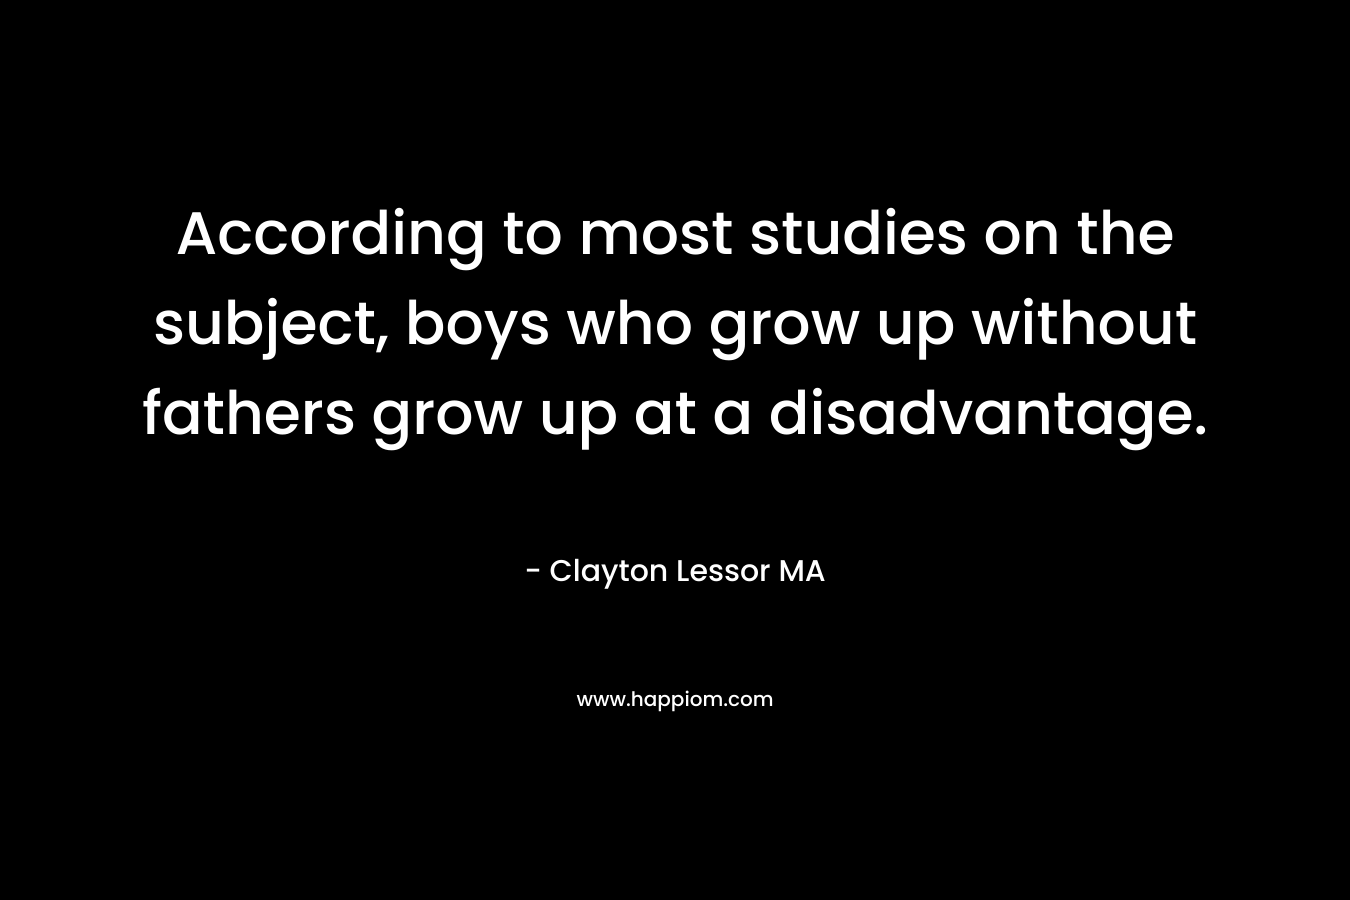 According to most studies on the subject, boys who grow up without fathers grow up at a disadvantage. – Clayton Lessor MA